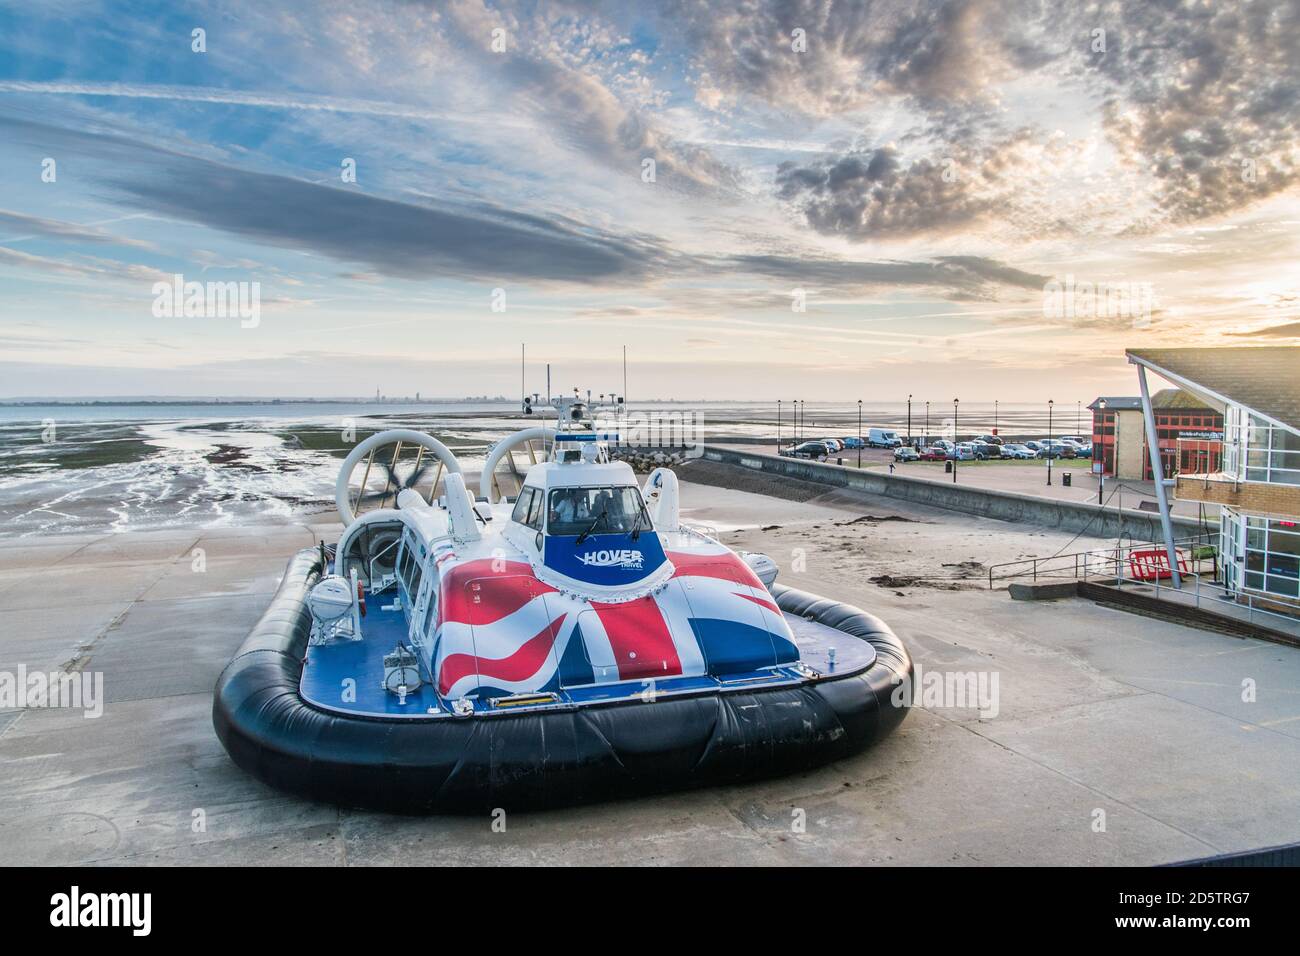 Early morning hovercraft flight ready for take off Stock Photo